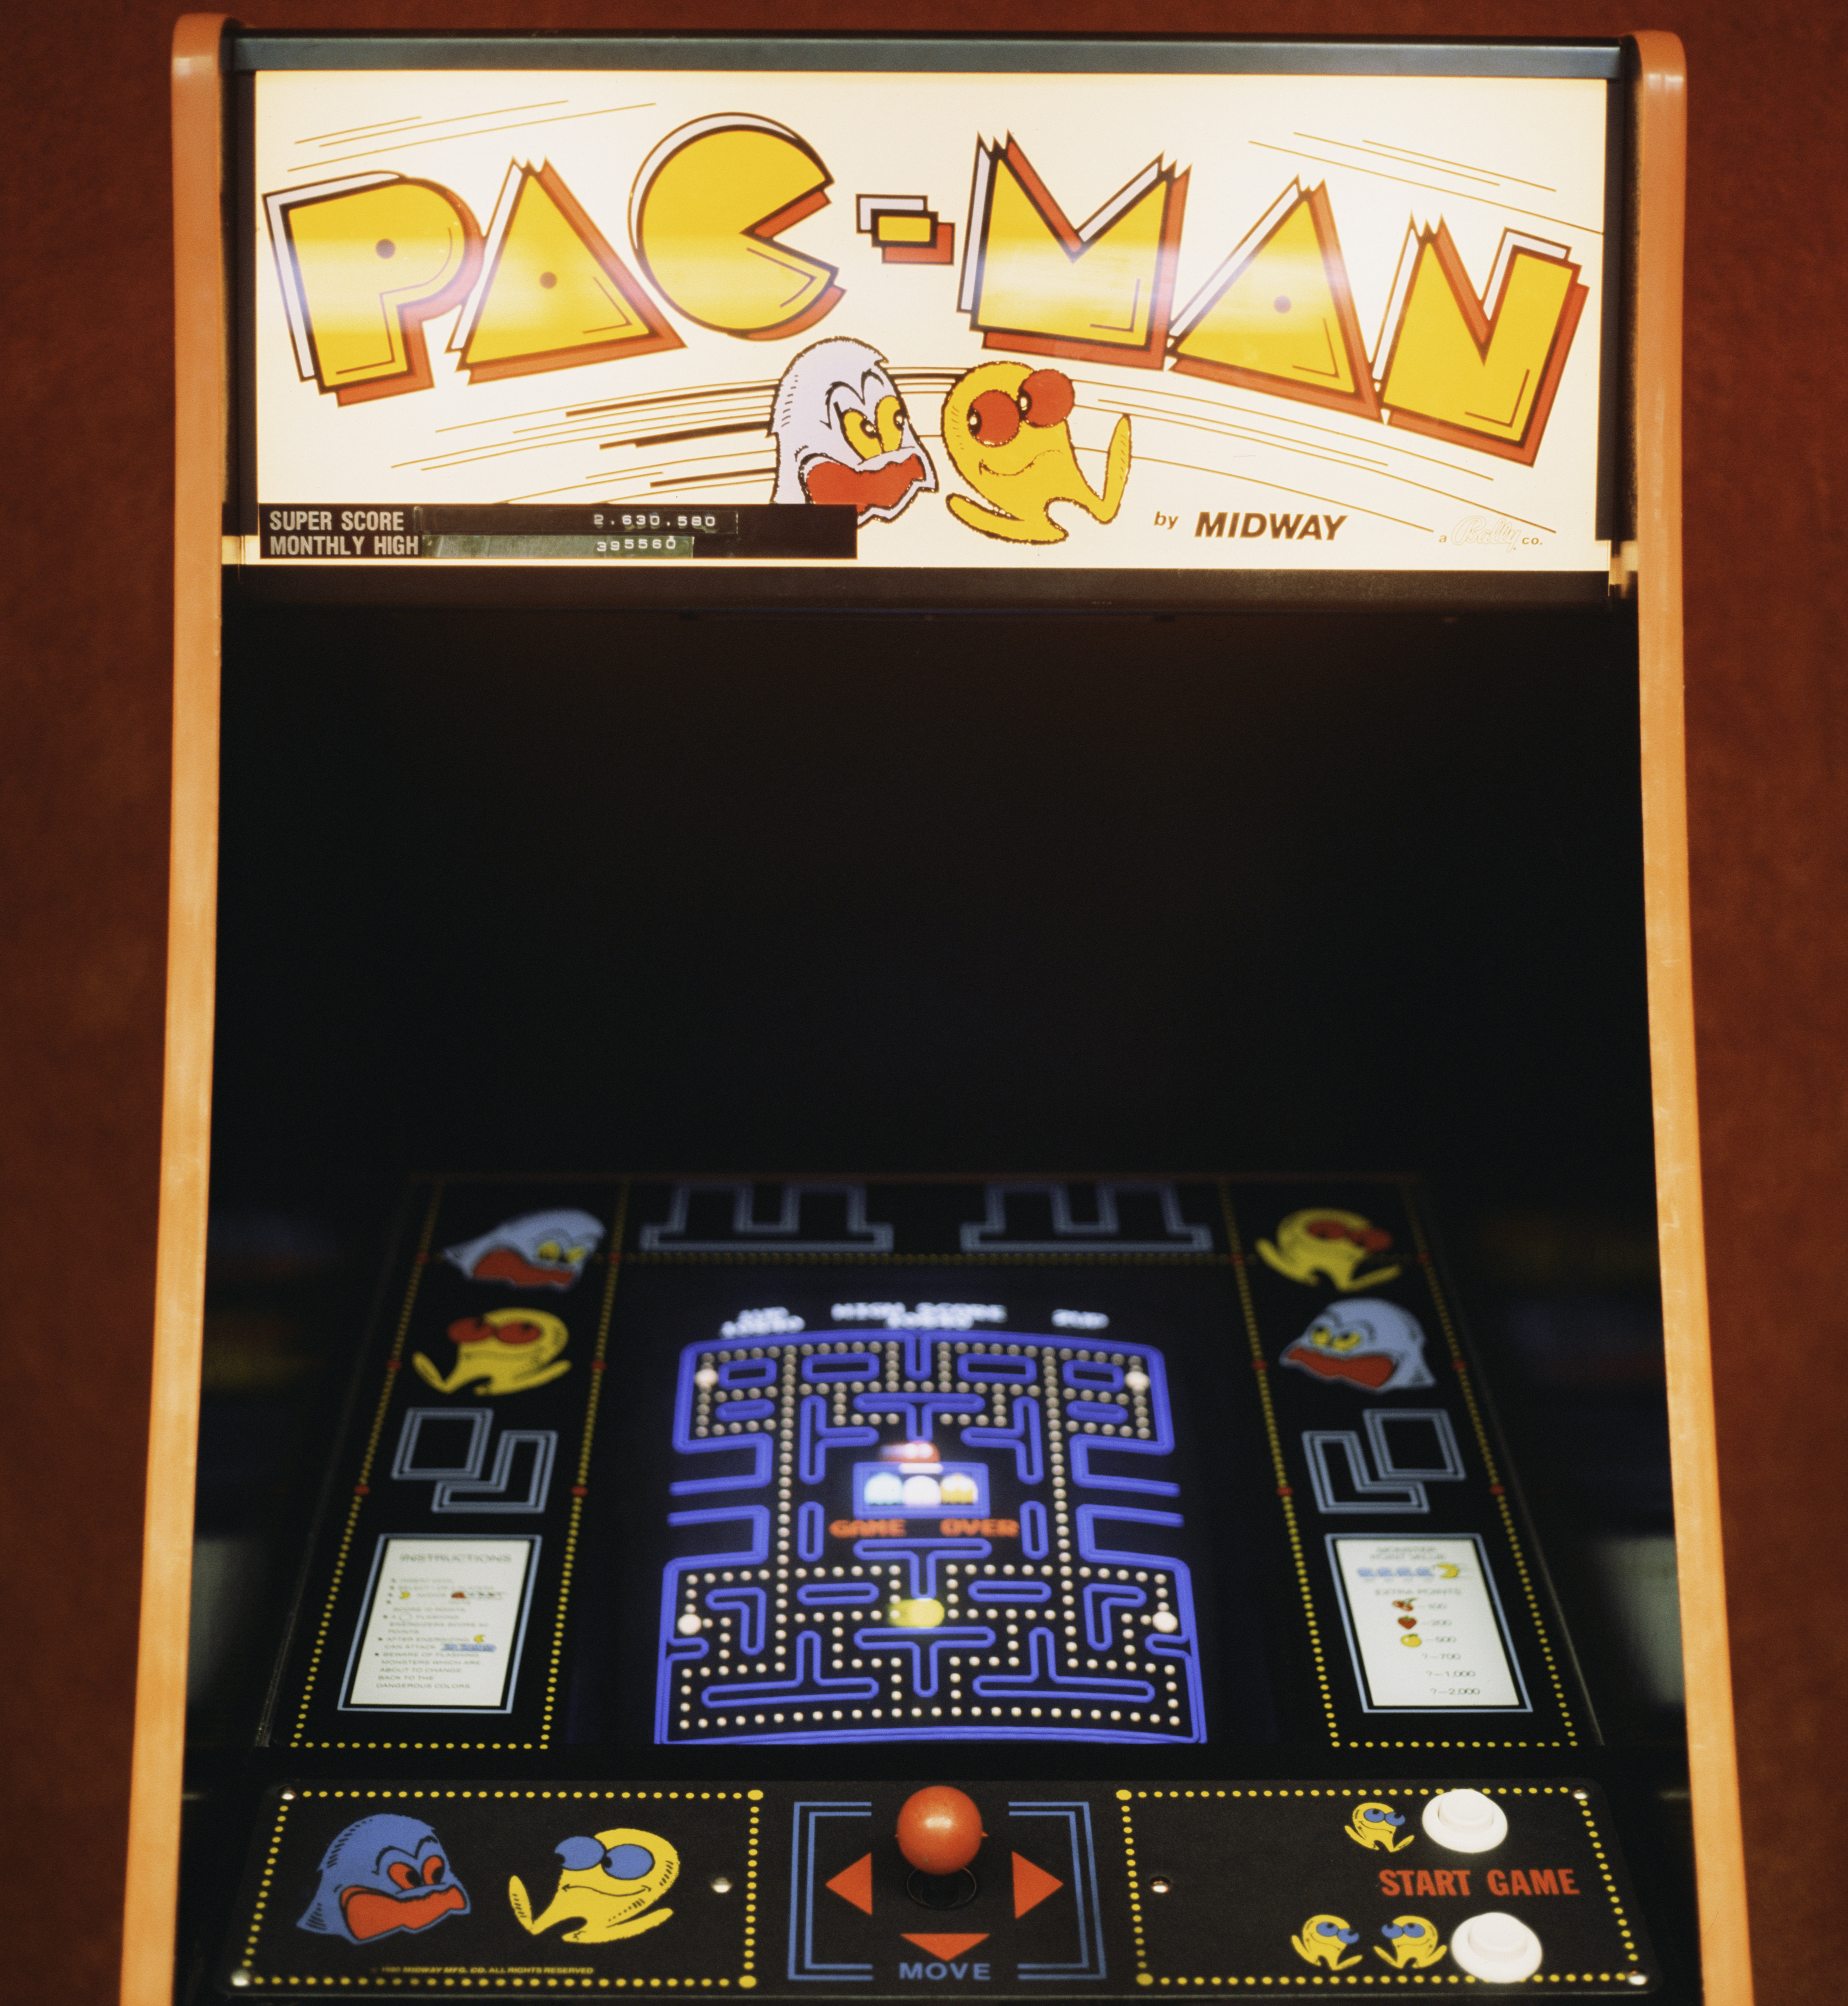 Play Pac-Man for Free on Its 35th Anniversary Time